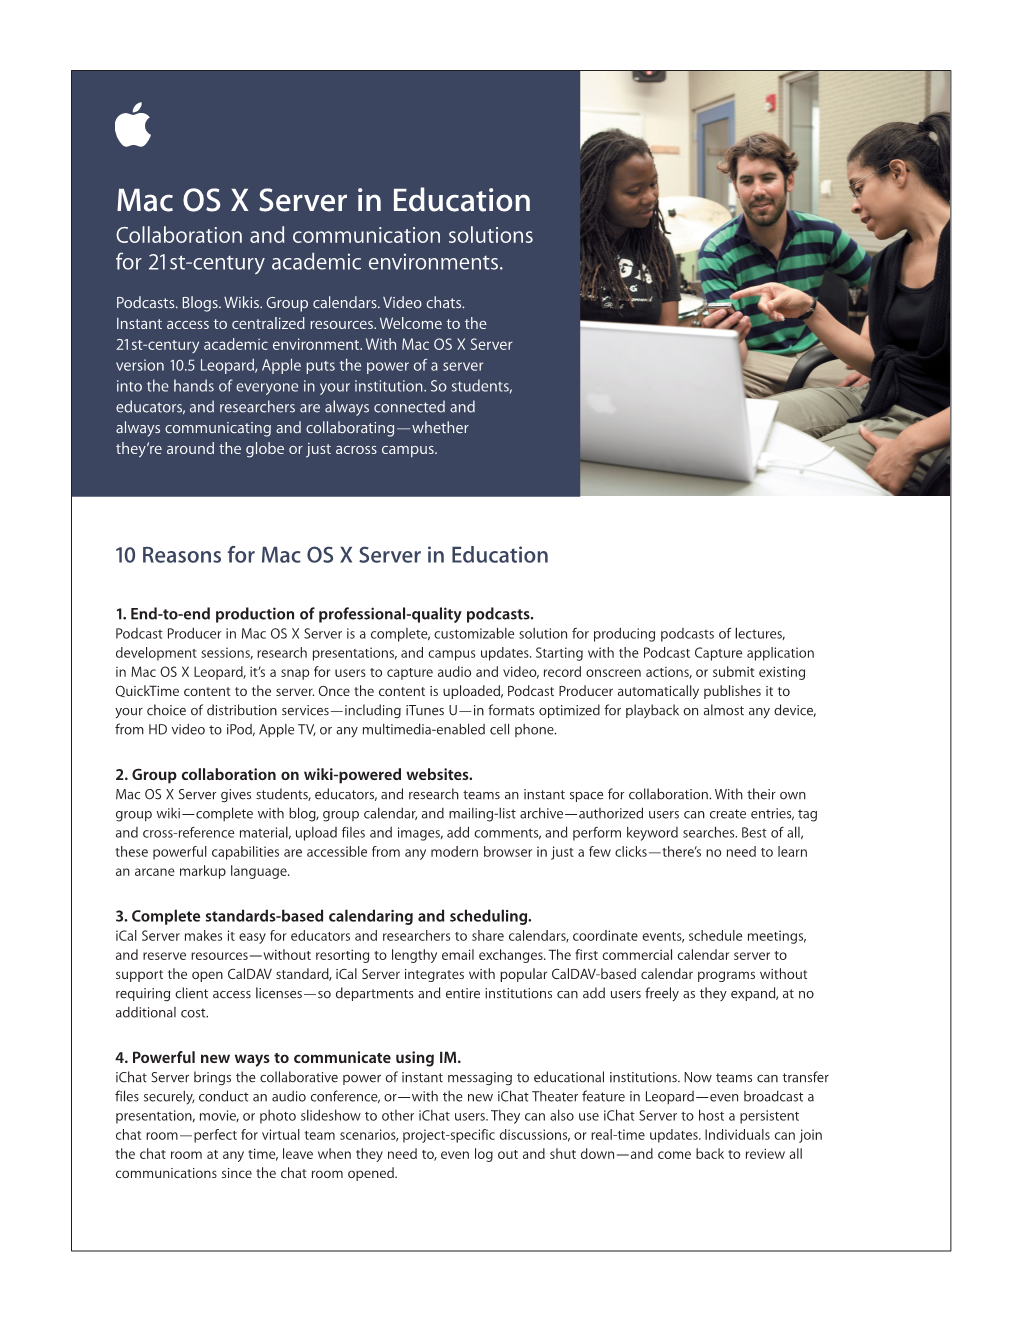 Mac OS X Server in Education Collaboration and Communication Solutions for 21St-Century Academic Environments